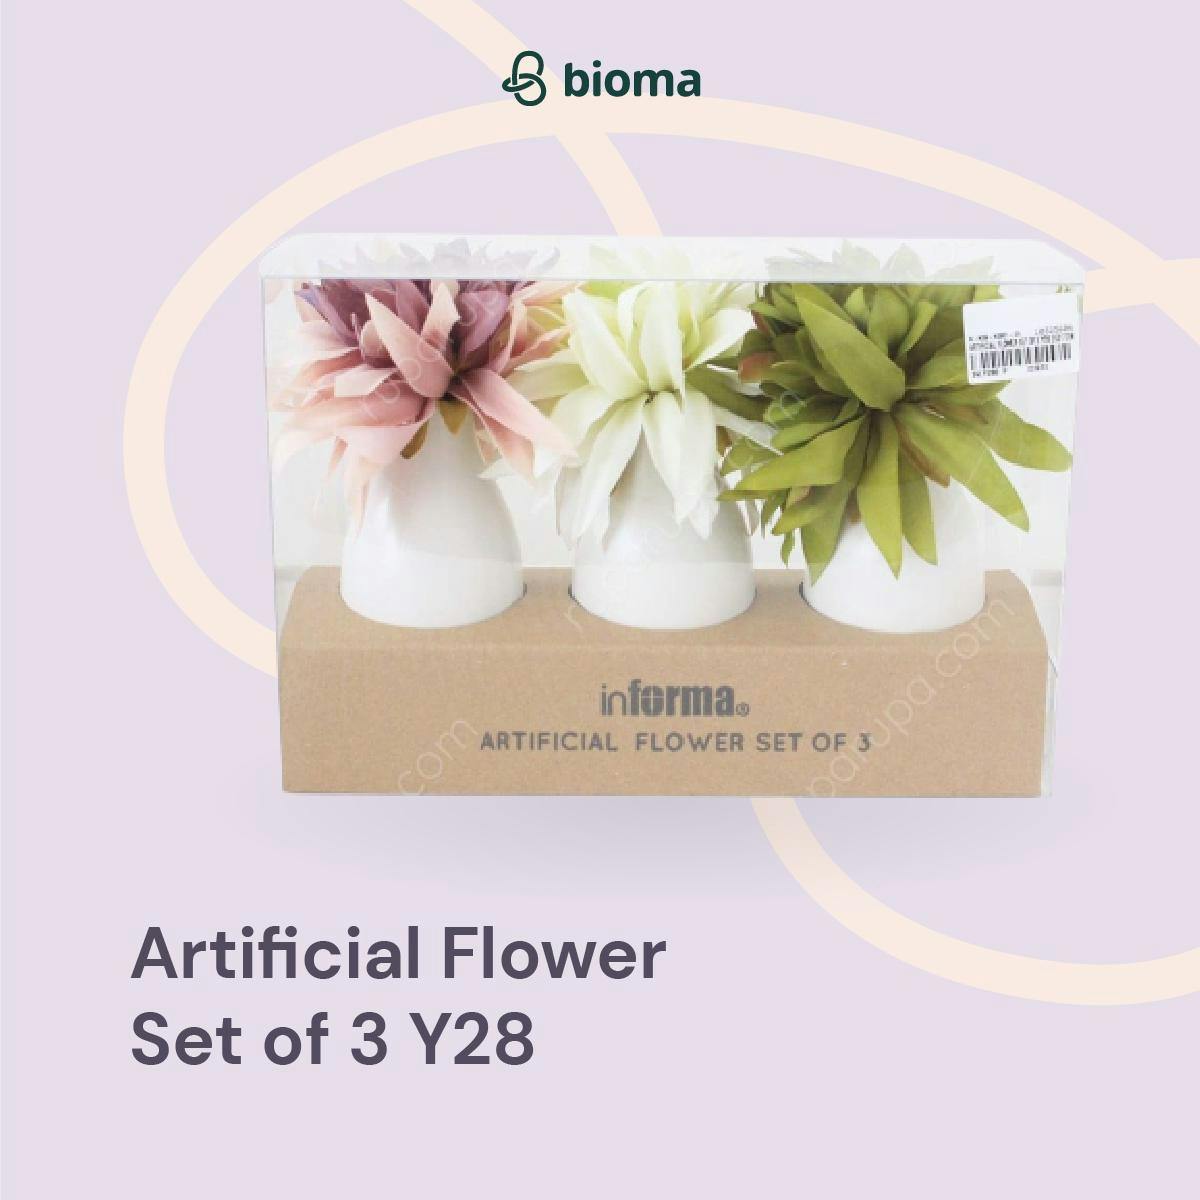 Image 504 Artificial Flower Set of 3 Y28